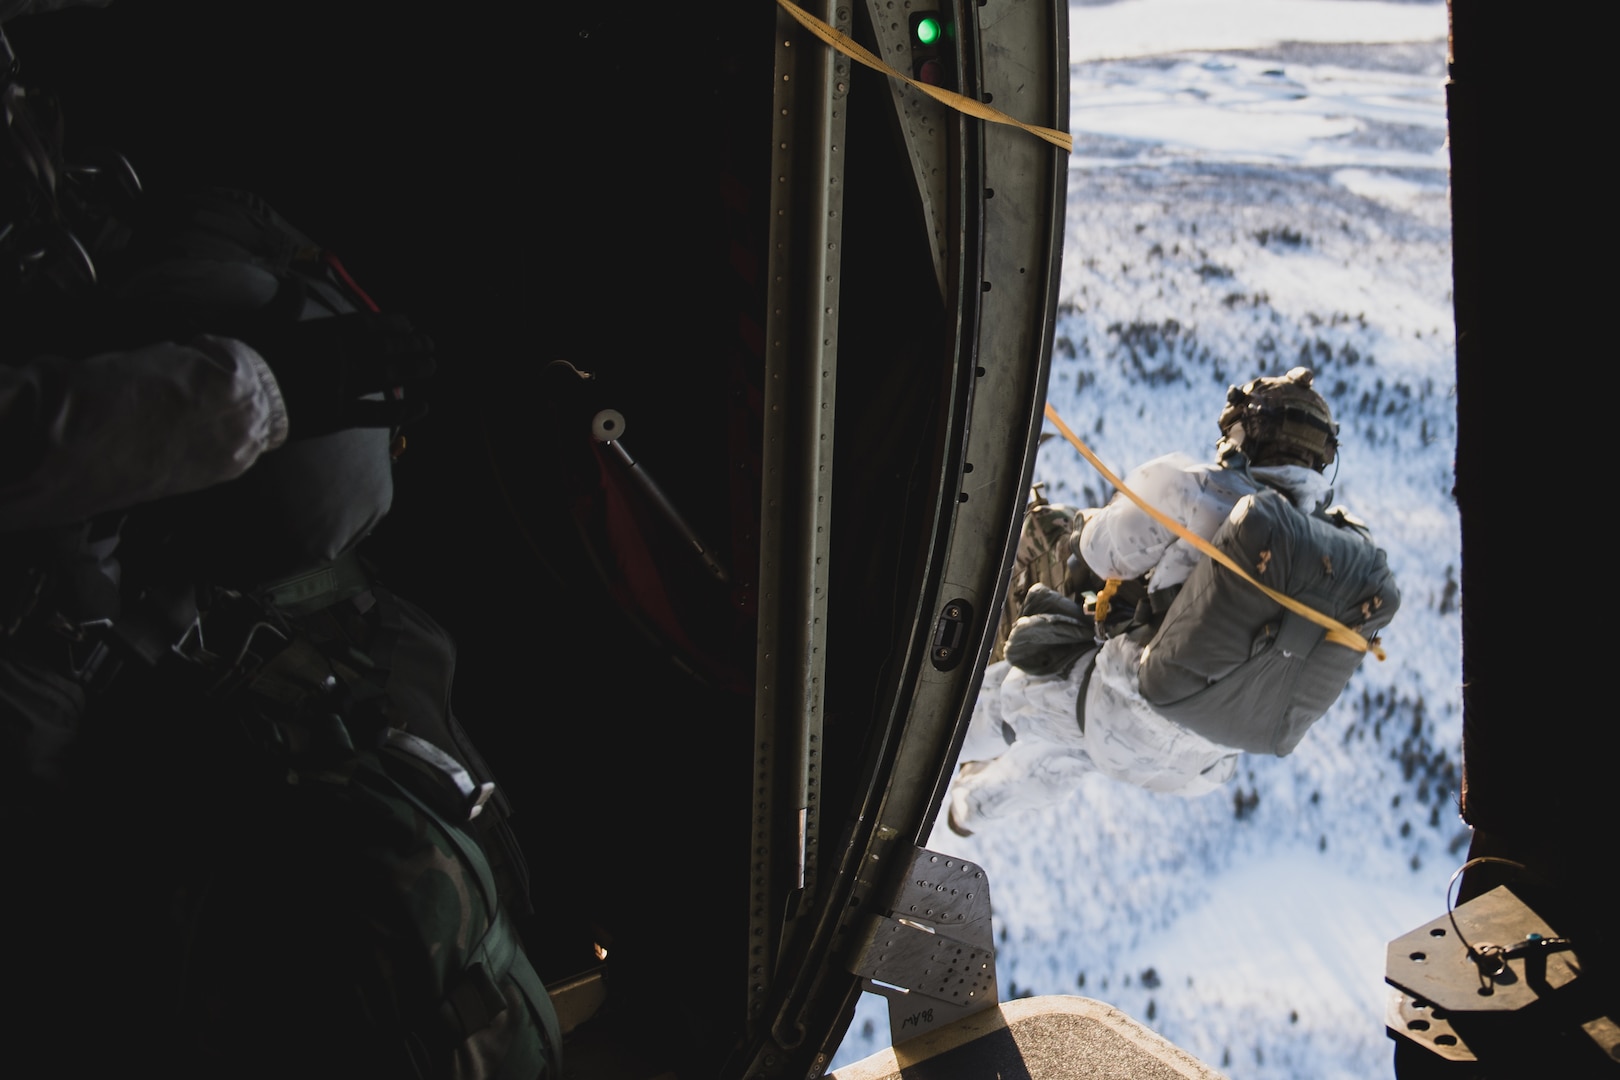 A U.S. Tactical Air Control Party Airman assigned to the 2nd Air Support Operations Squadron, Vilseck, Germany, jumps out of a C-130J Super Hercules over Kiruna, Sweden, prior to Exercise Cold Response 20, Feb. 27, 2020. Photo by Staff Sgt. Devin Boyer.